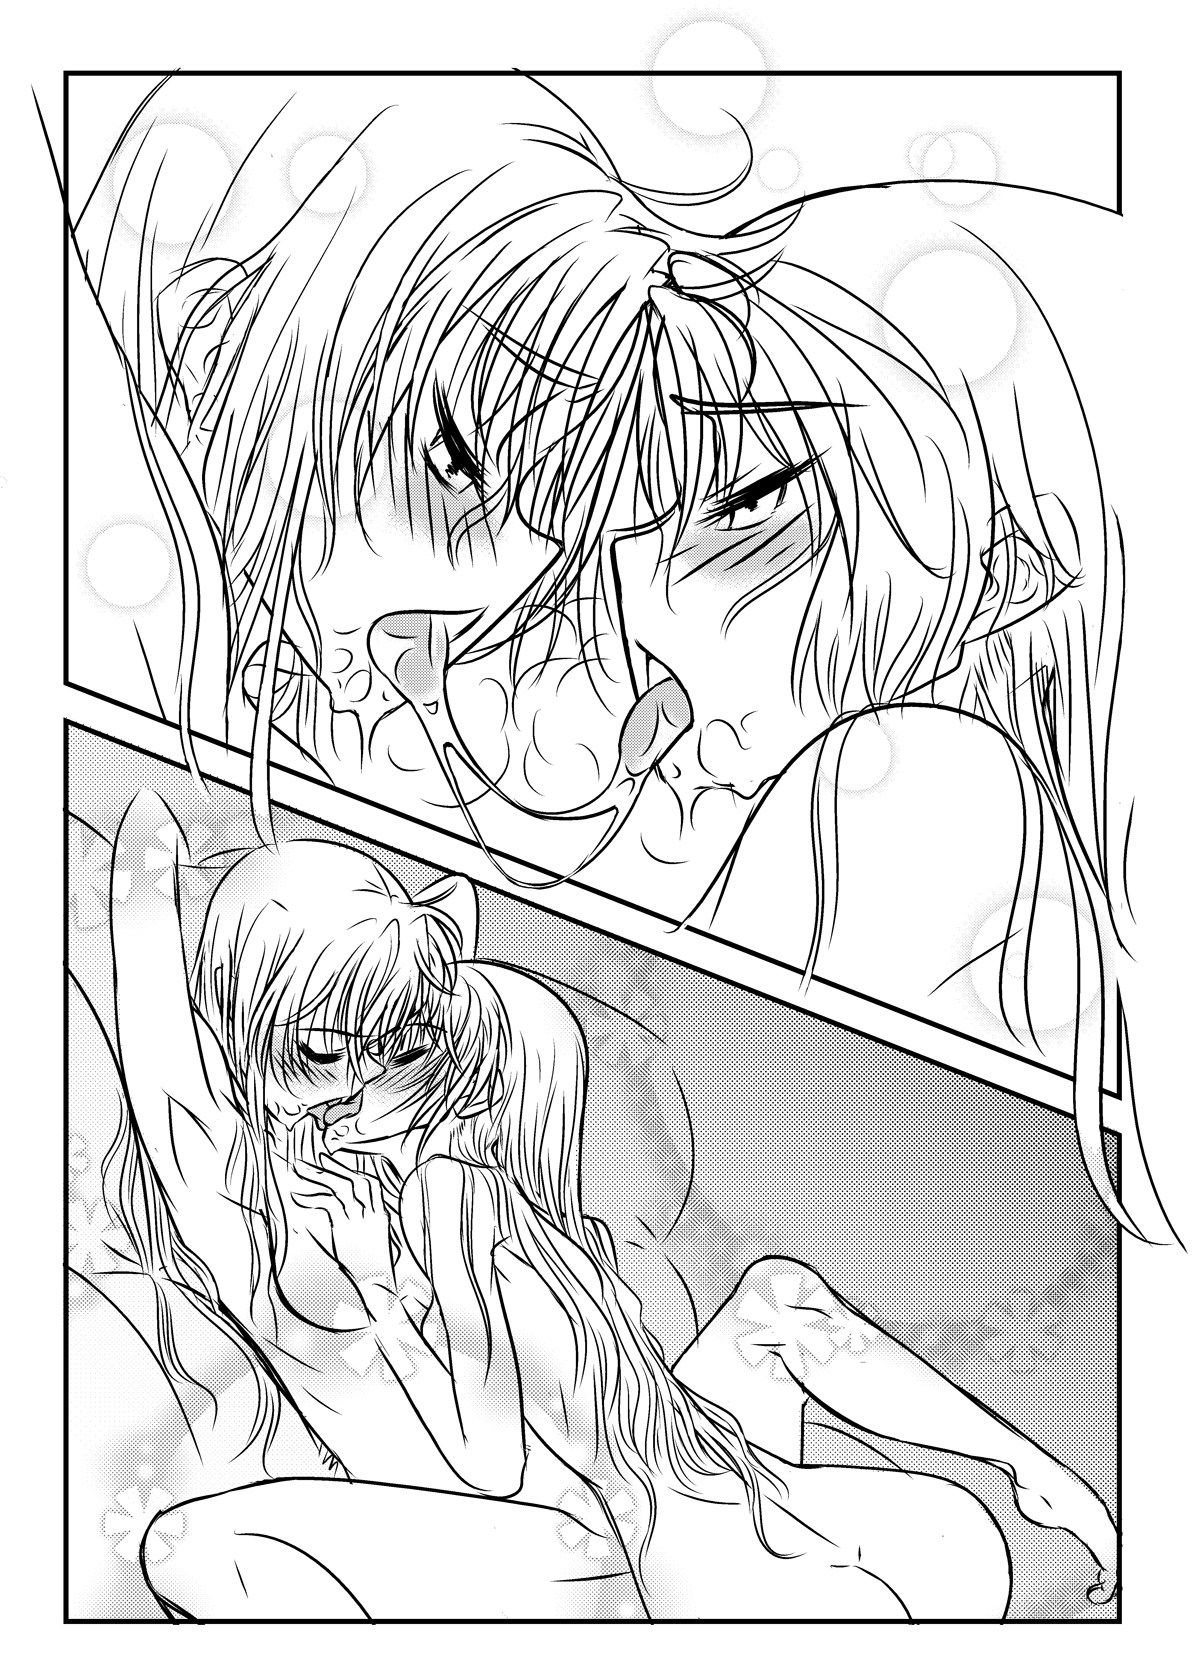 [57 pictures] magical Girl Lyrical Nanoha fate Testarossa & high town of erotic pictures! Part 2 15